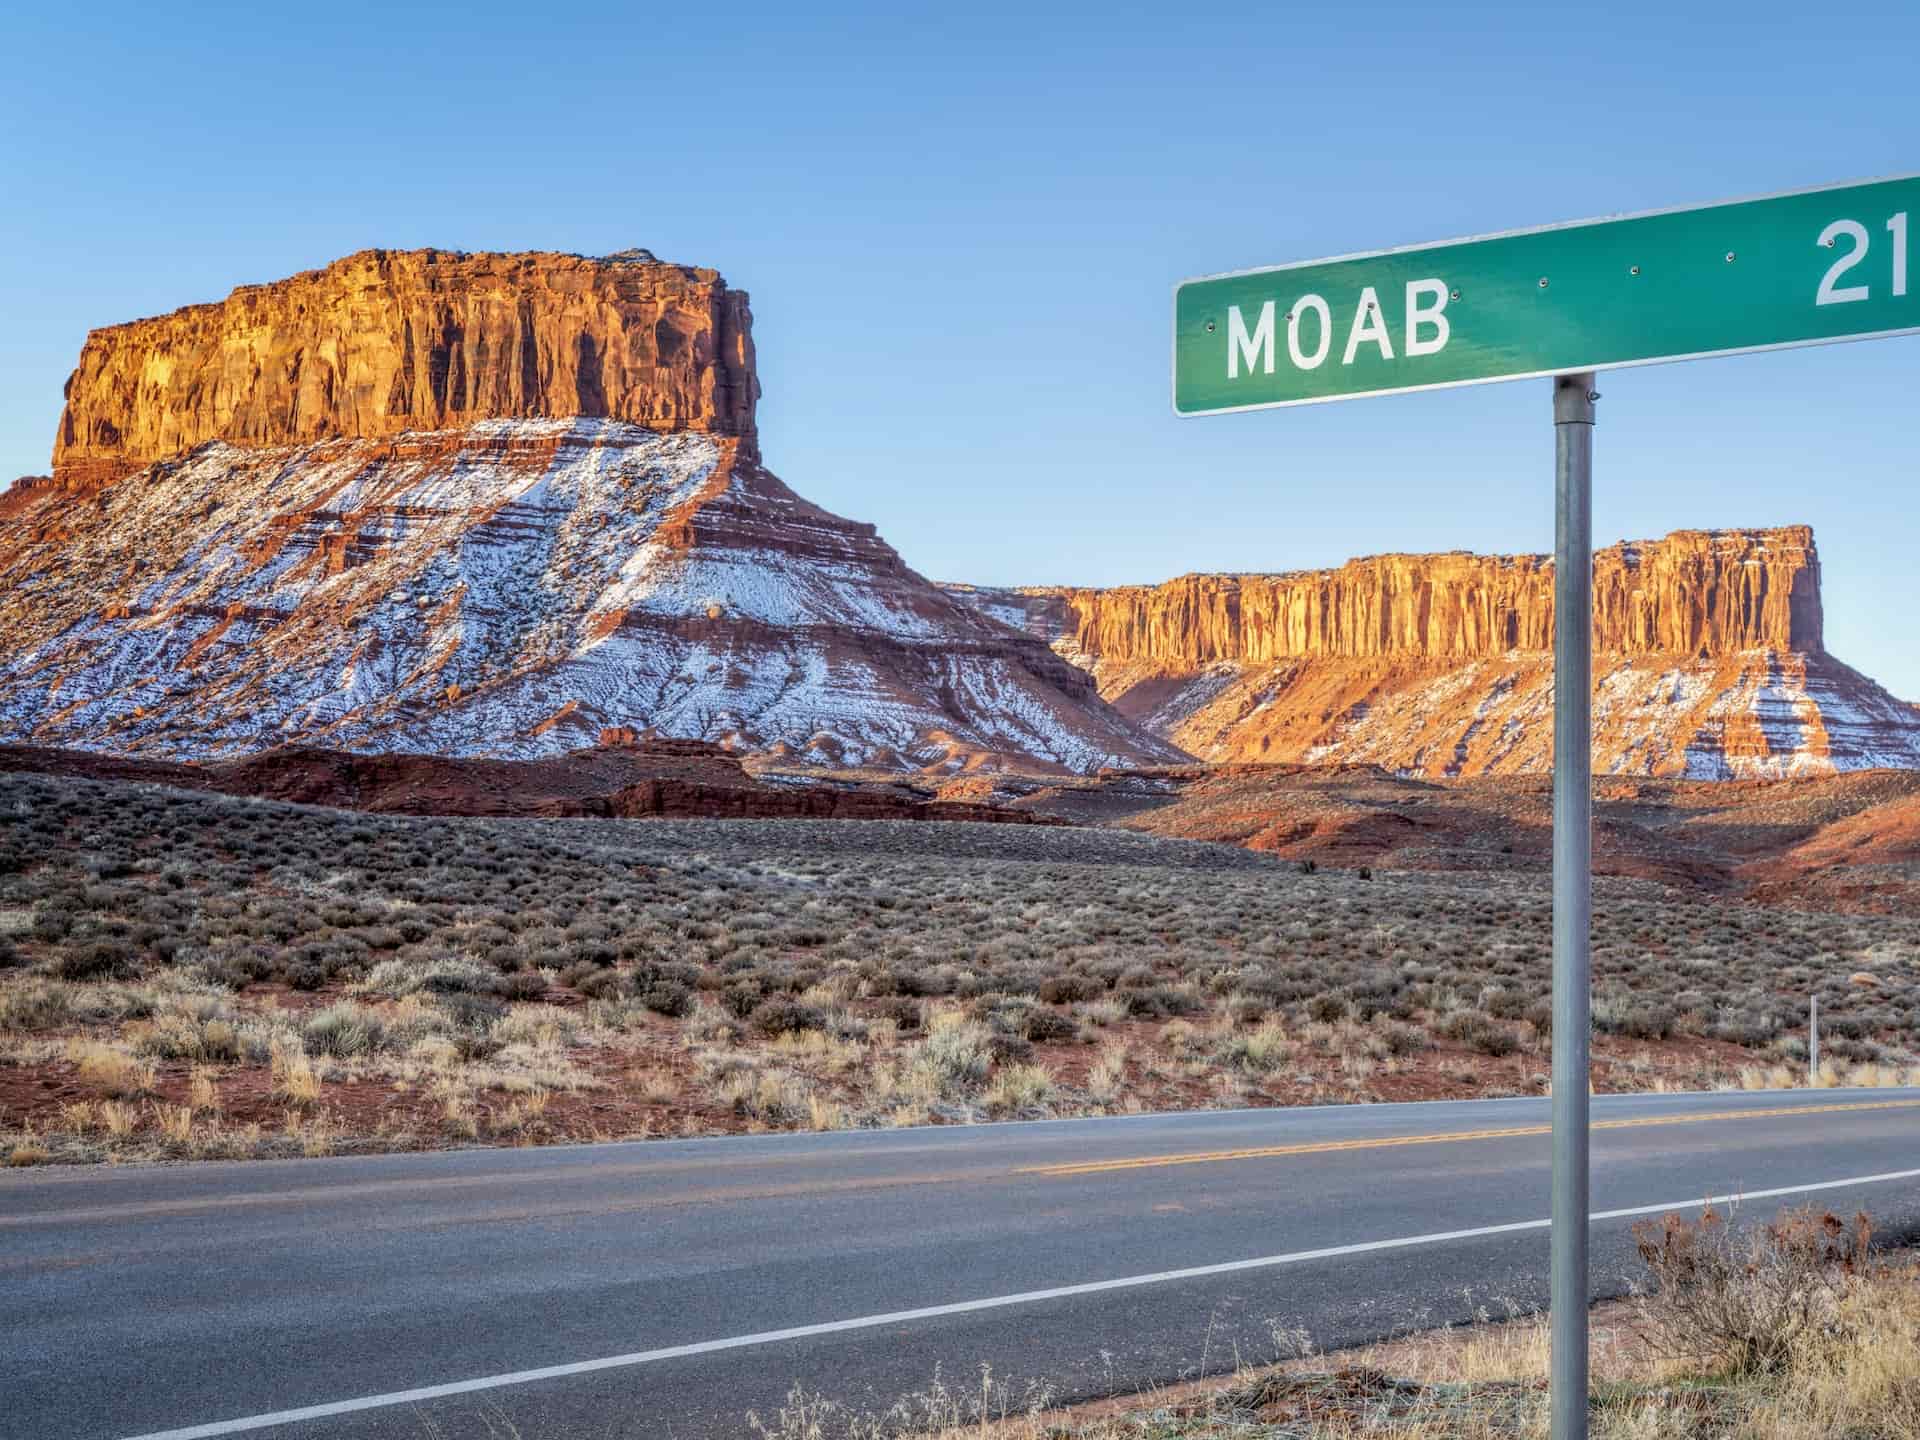 14 Things to Do in Moab, UT: Small Town Base Camp for National Parks